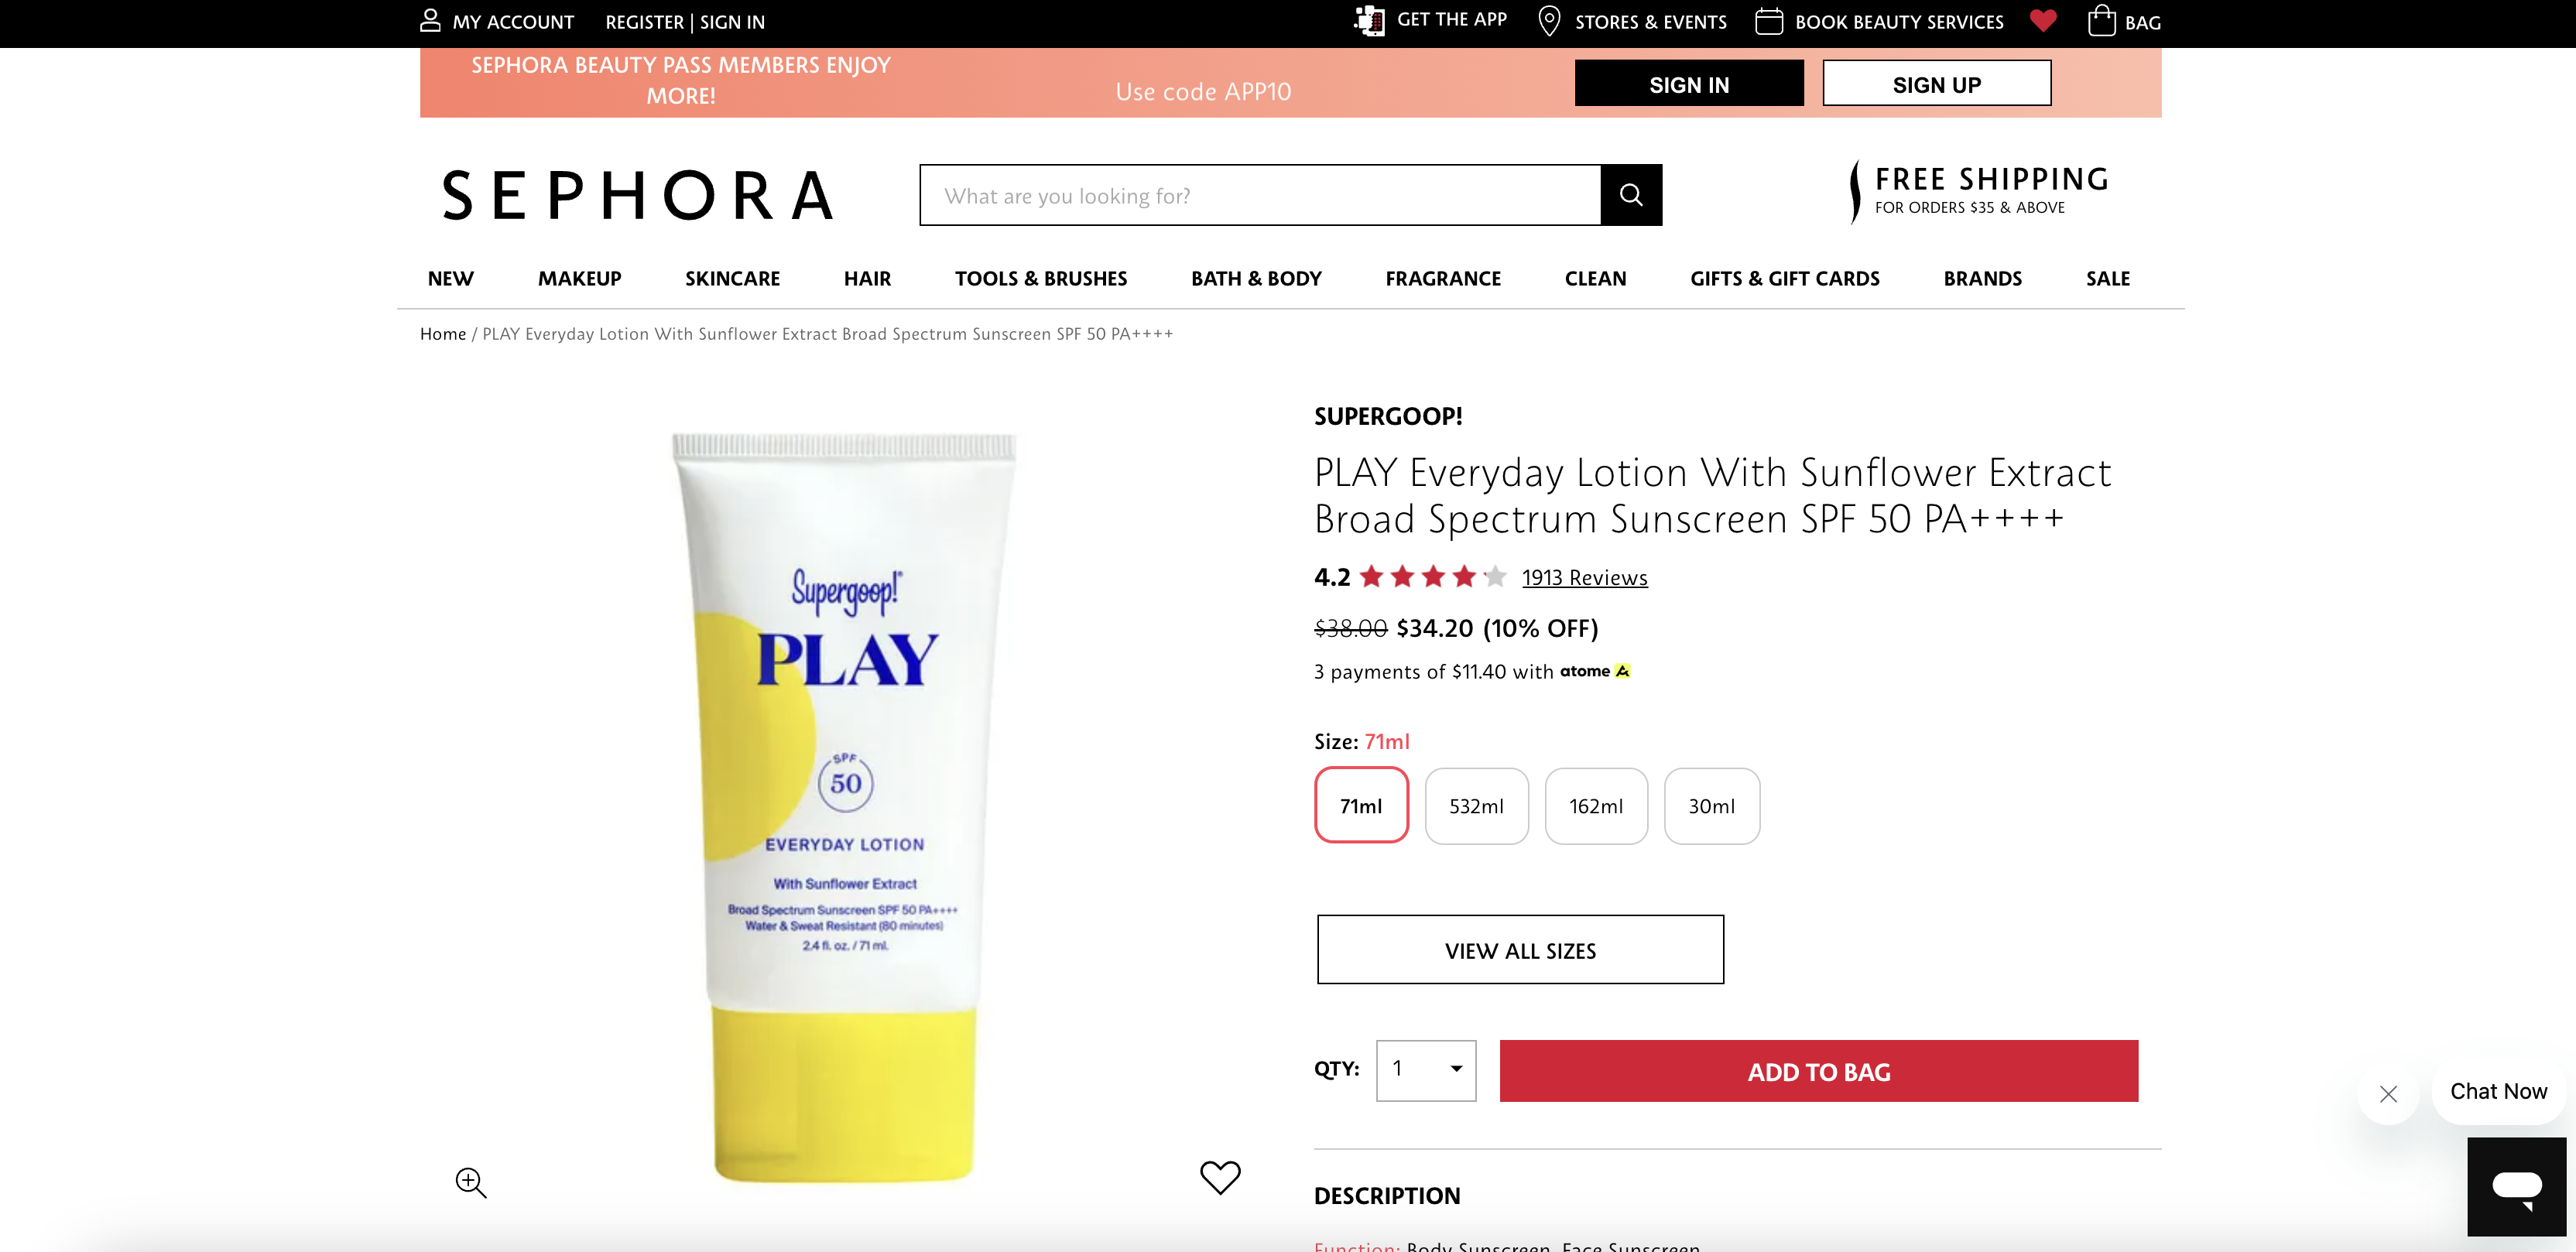 PLAY Everyday Lotion With Sunflower Extract Broad Spectrum Sunscreen SPF 50 PA